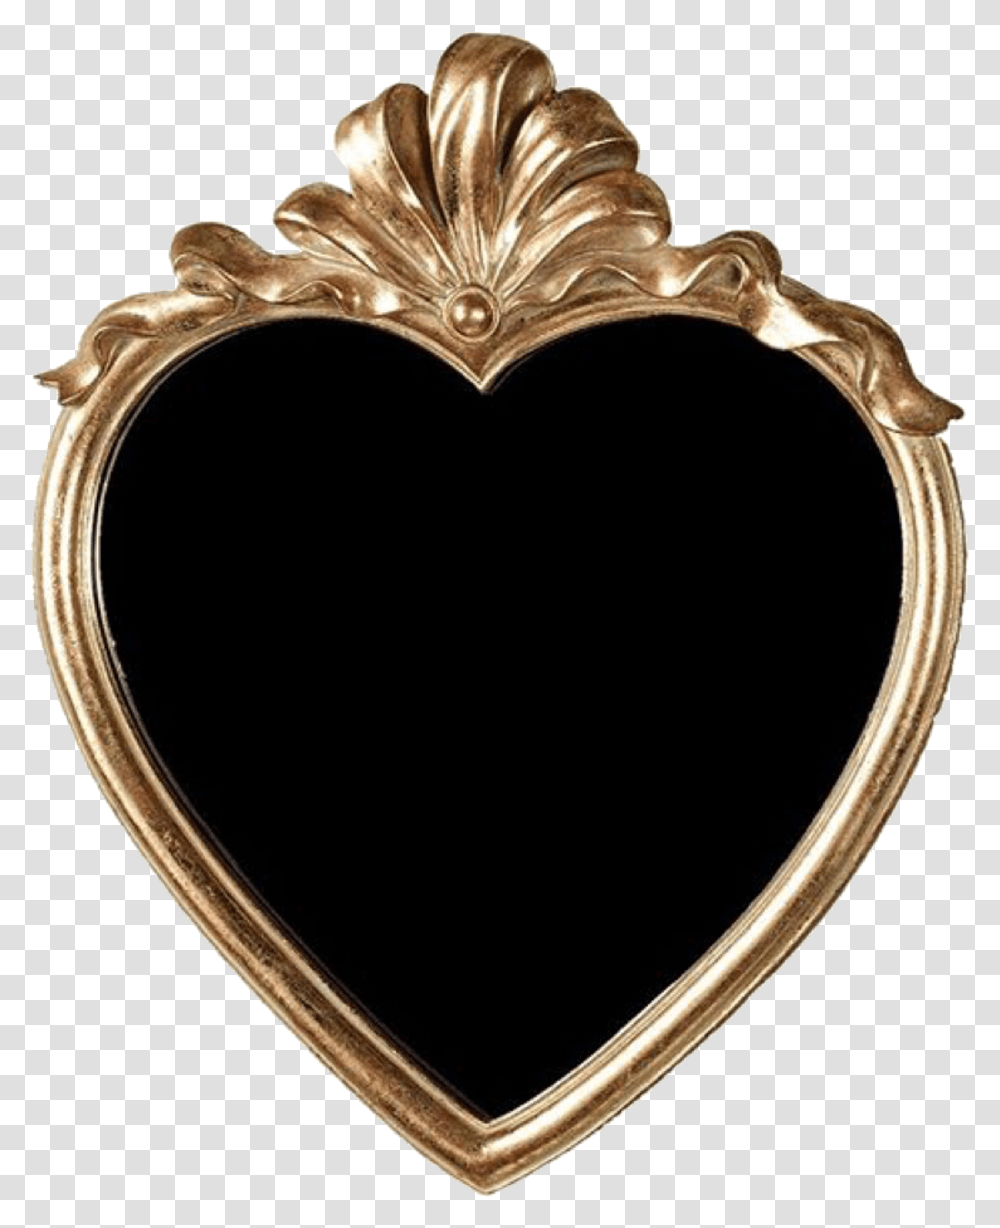 Gold Mirror Antique Old Overlay Edit Tumblr, Buckle, Cushion, Bronze, Locket Transparent Png